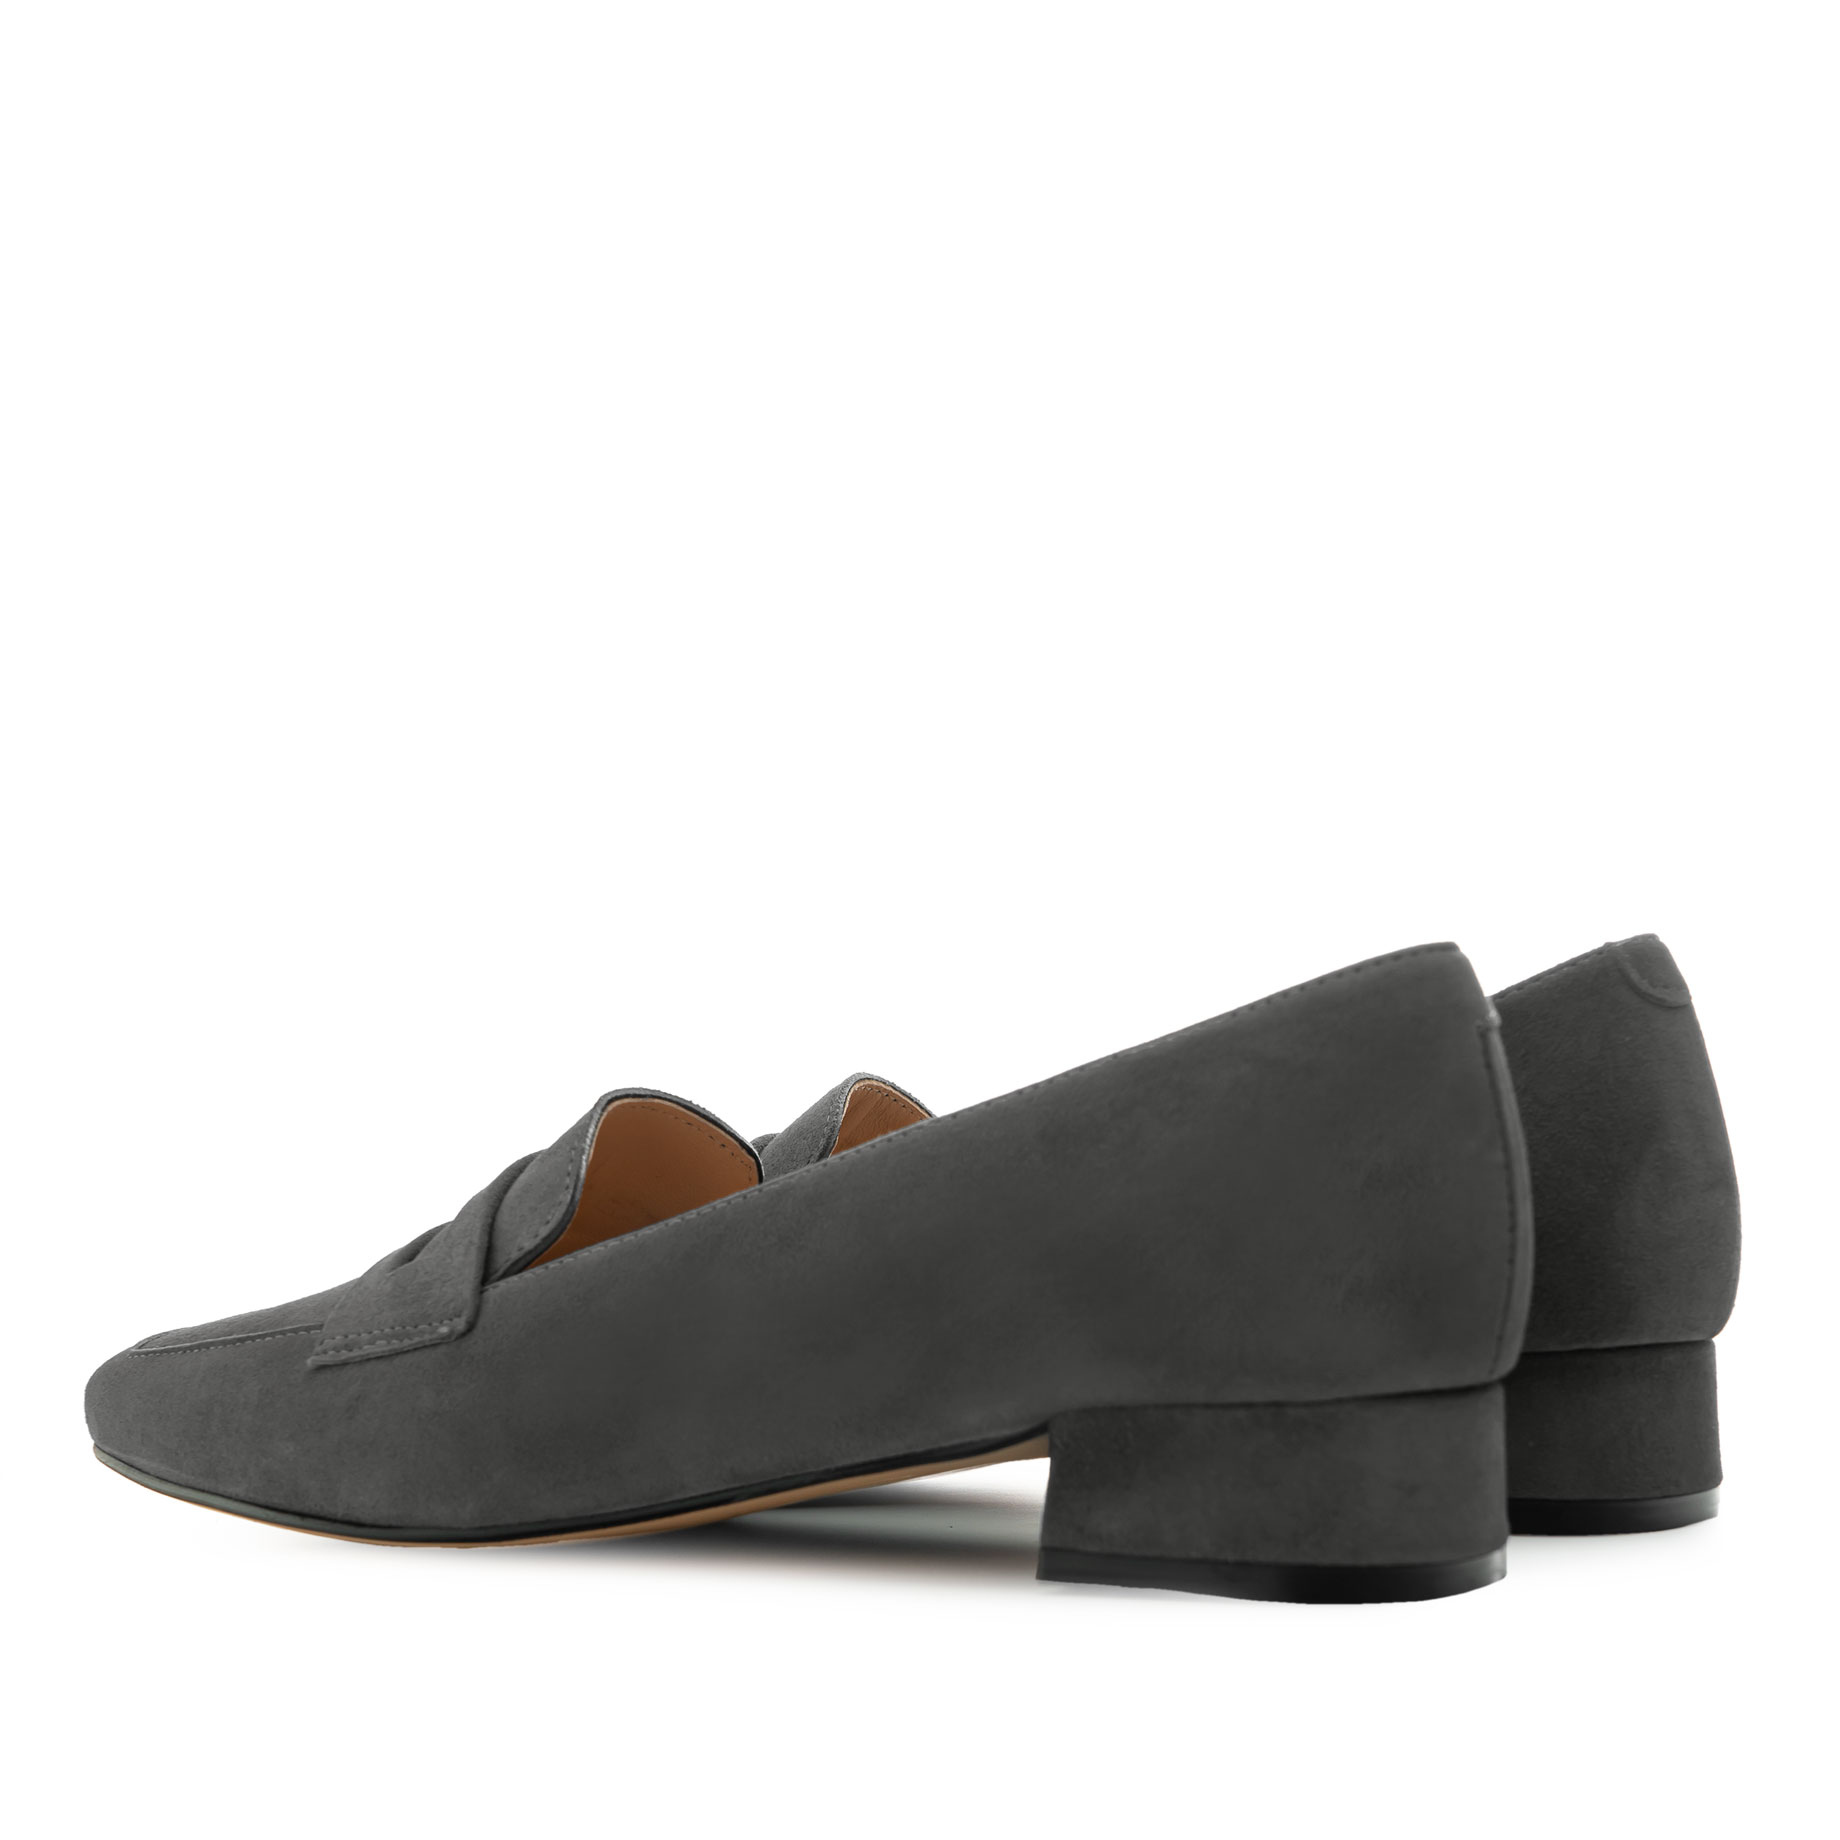 Moccasins in Grey Suede Leather 